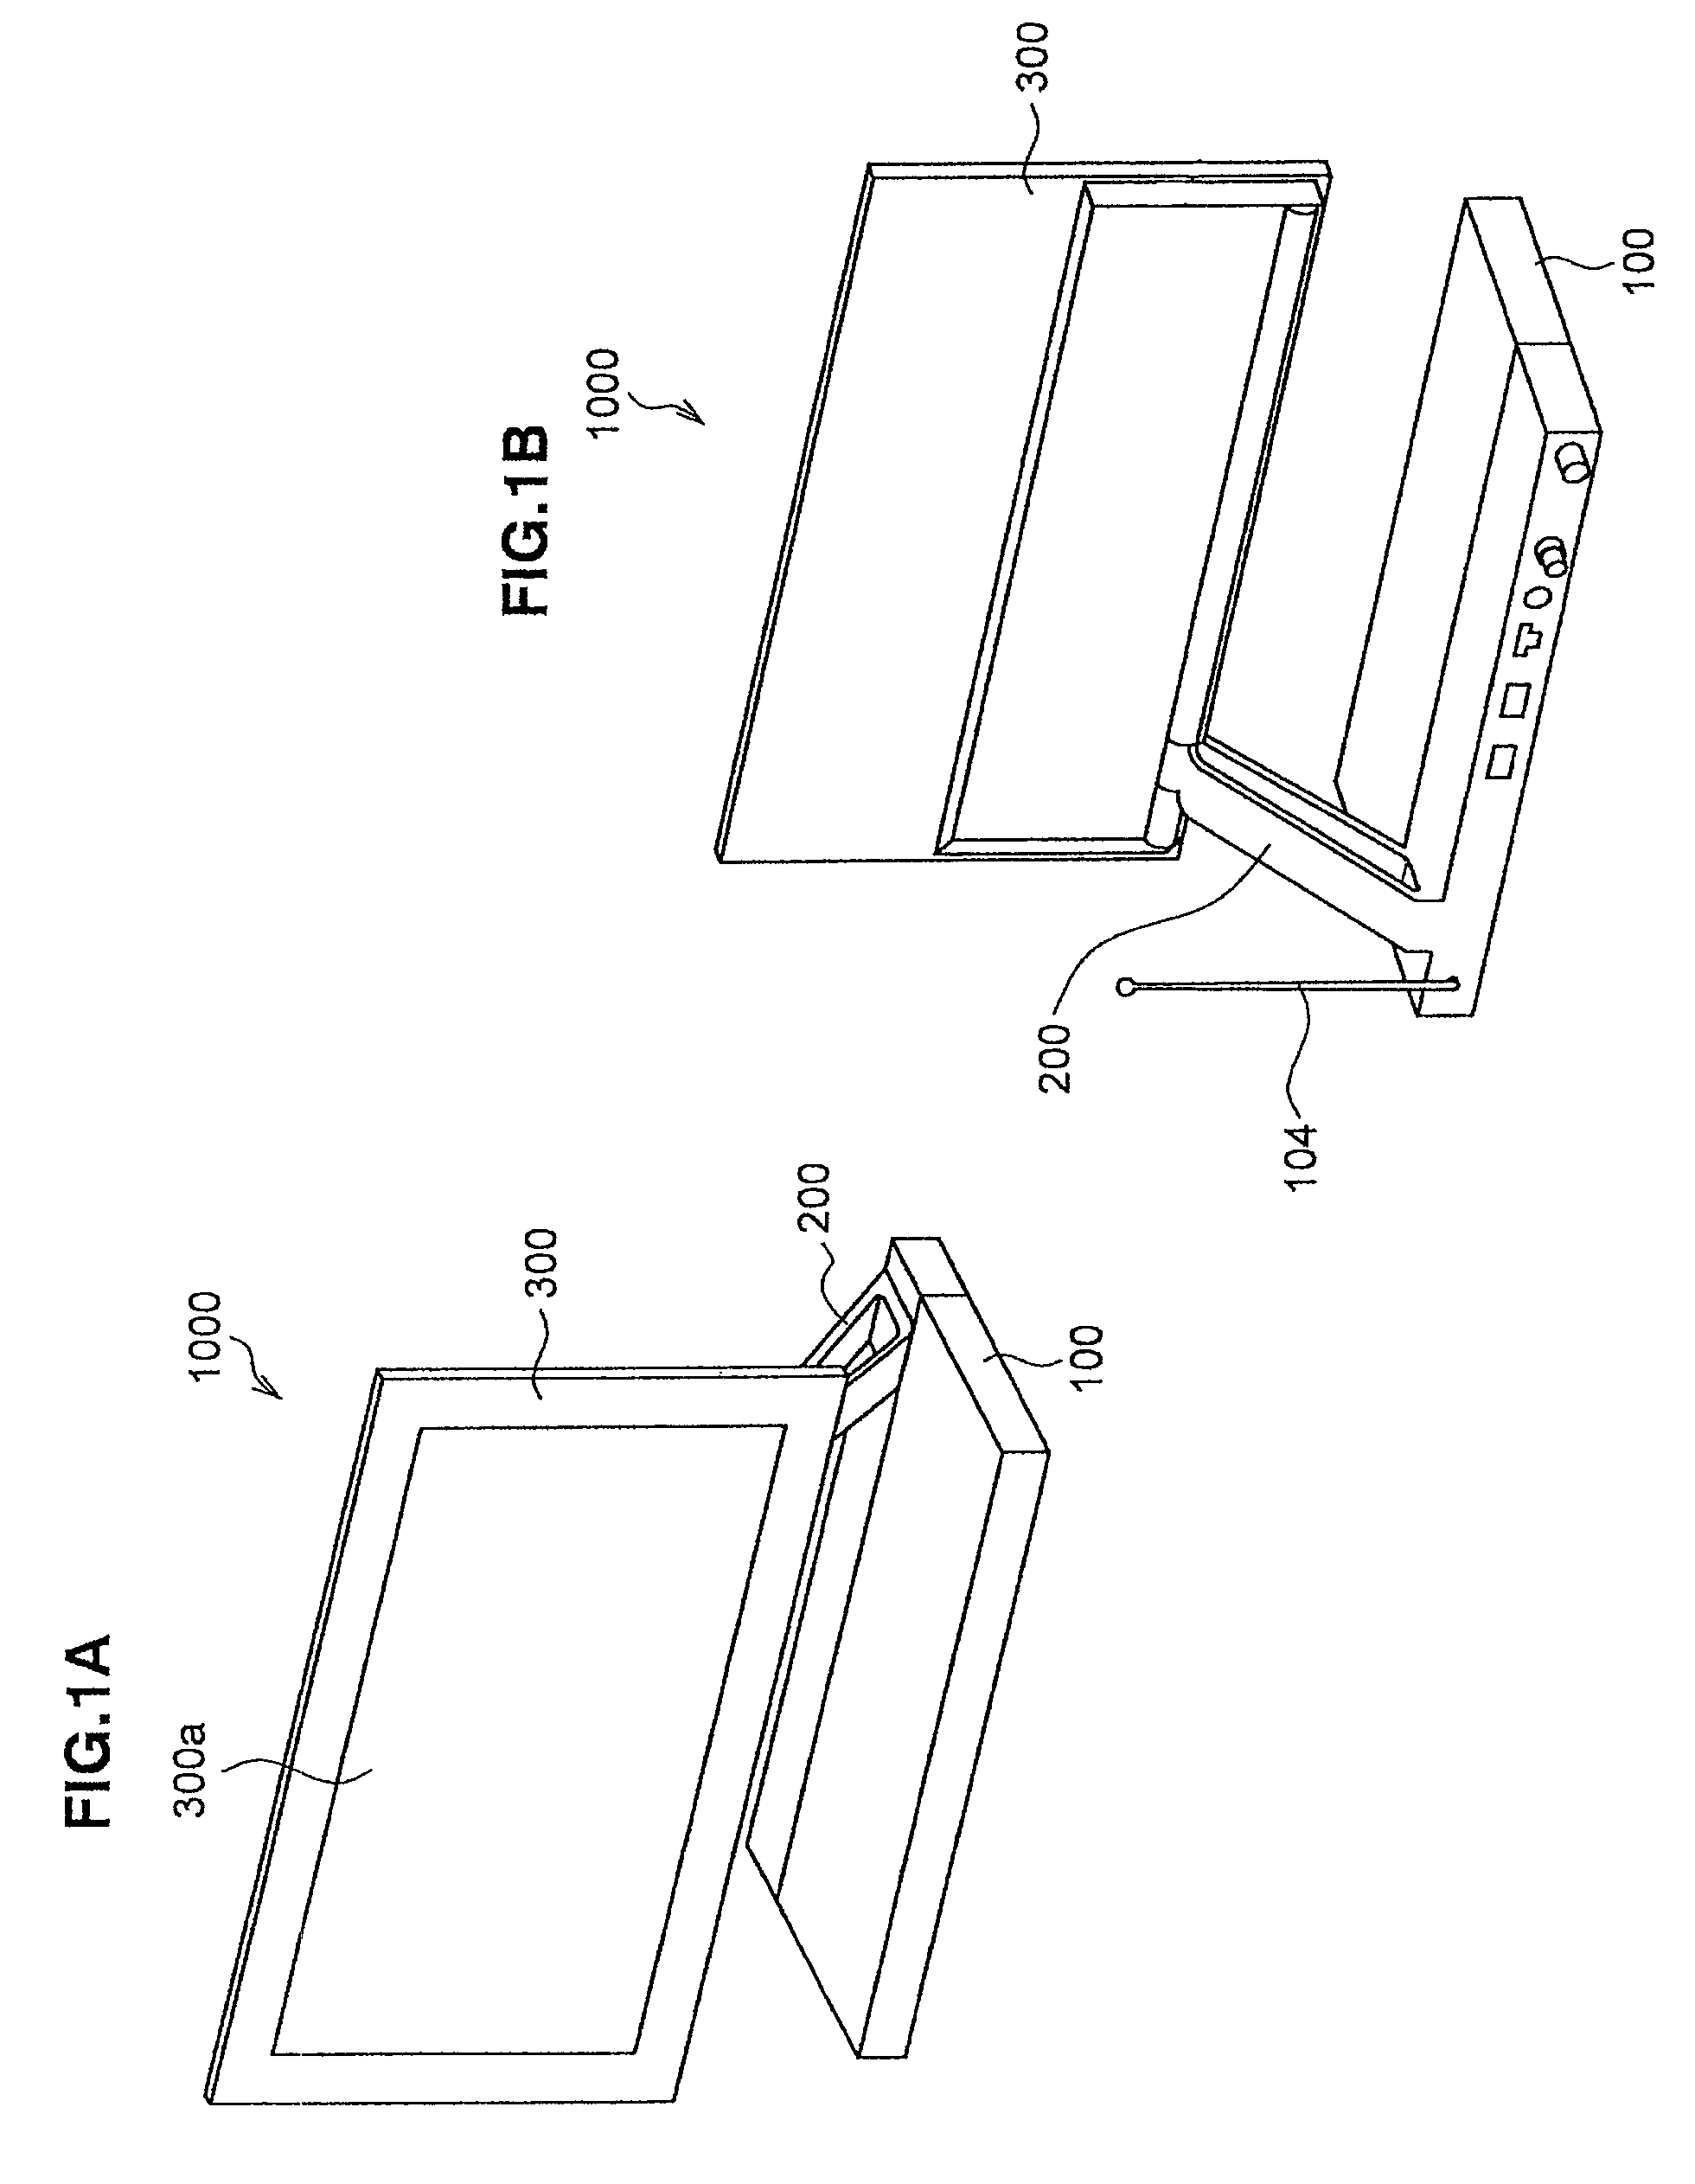 Heat radiation structure of electronic component and display device